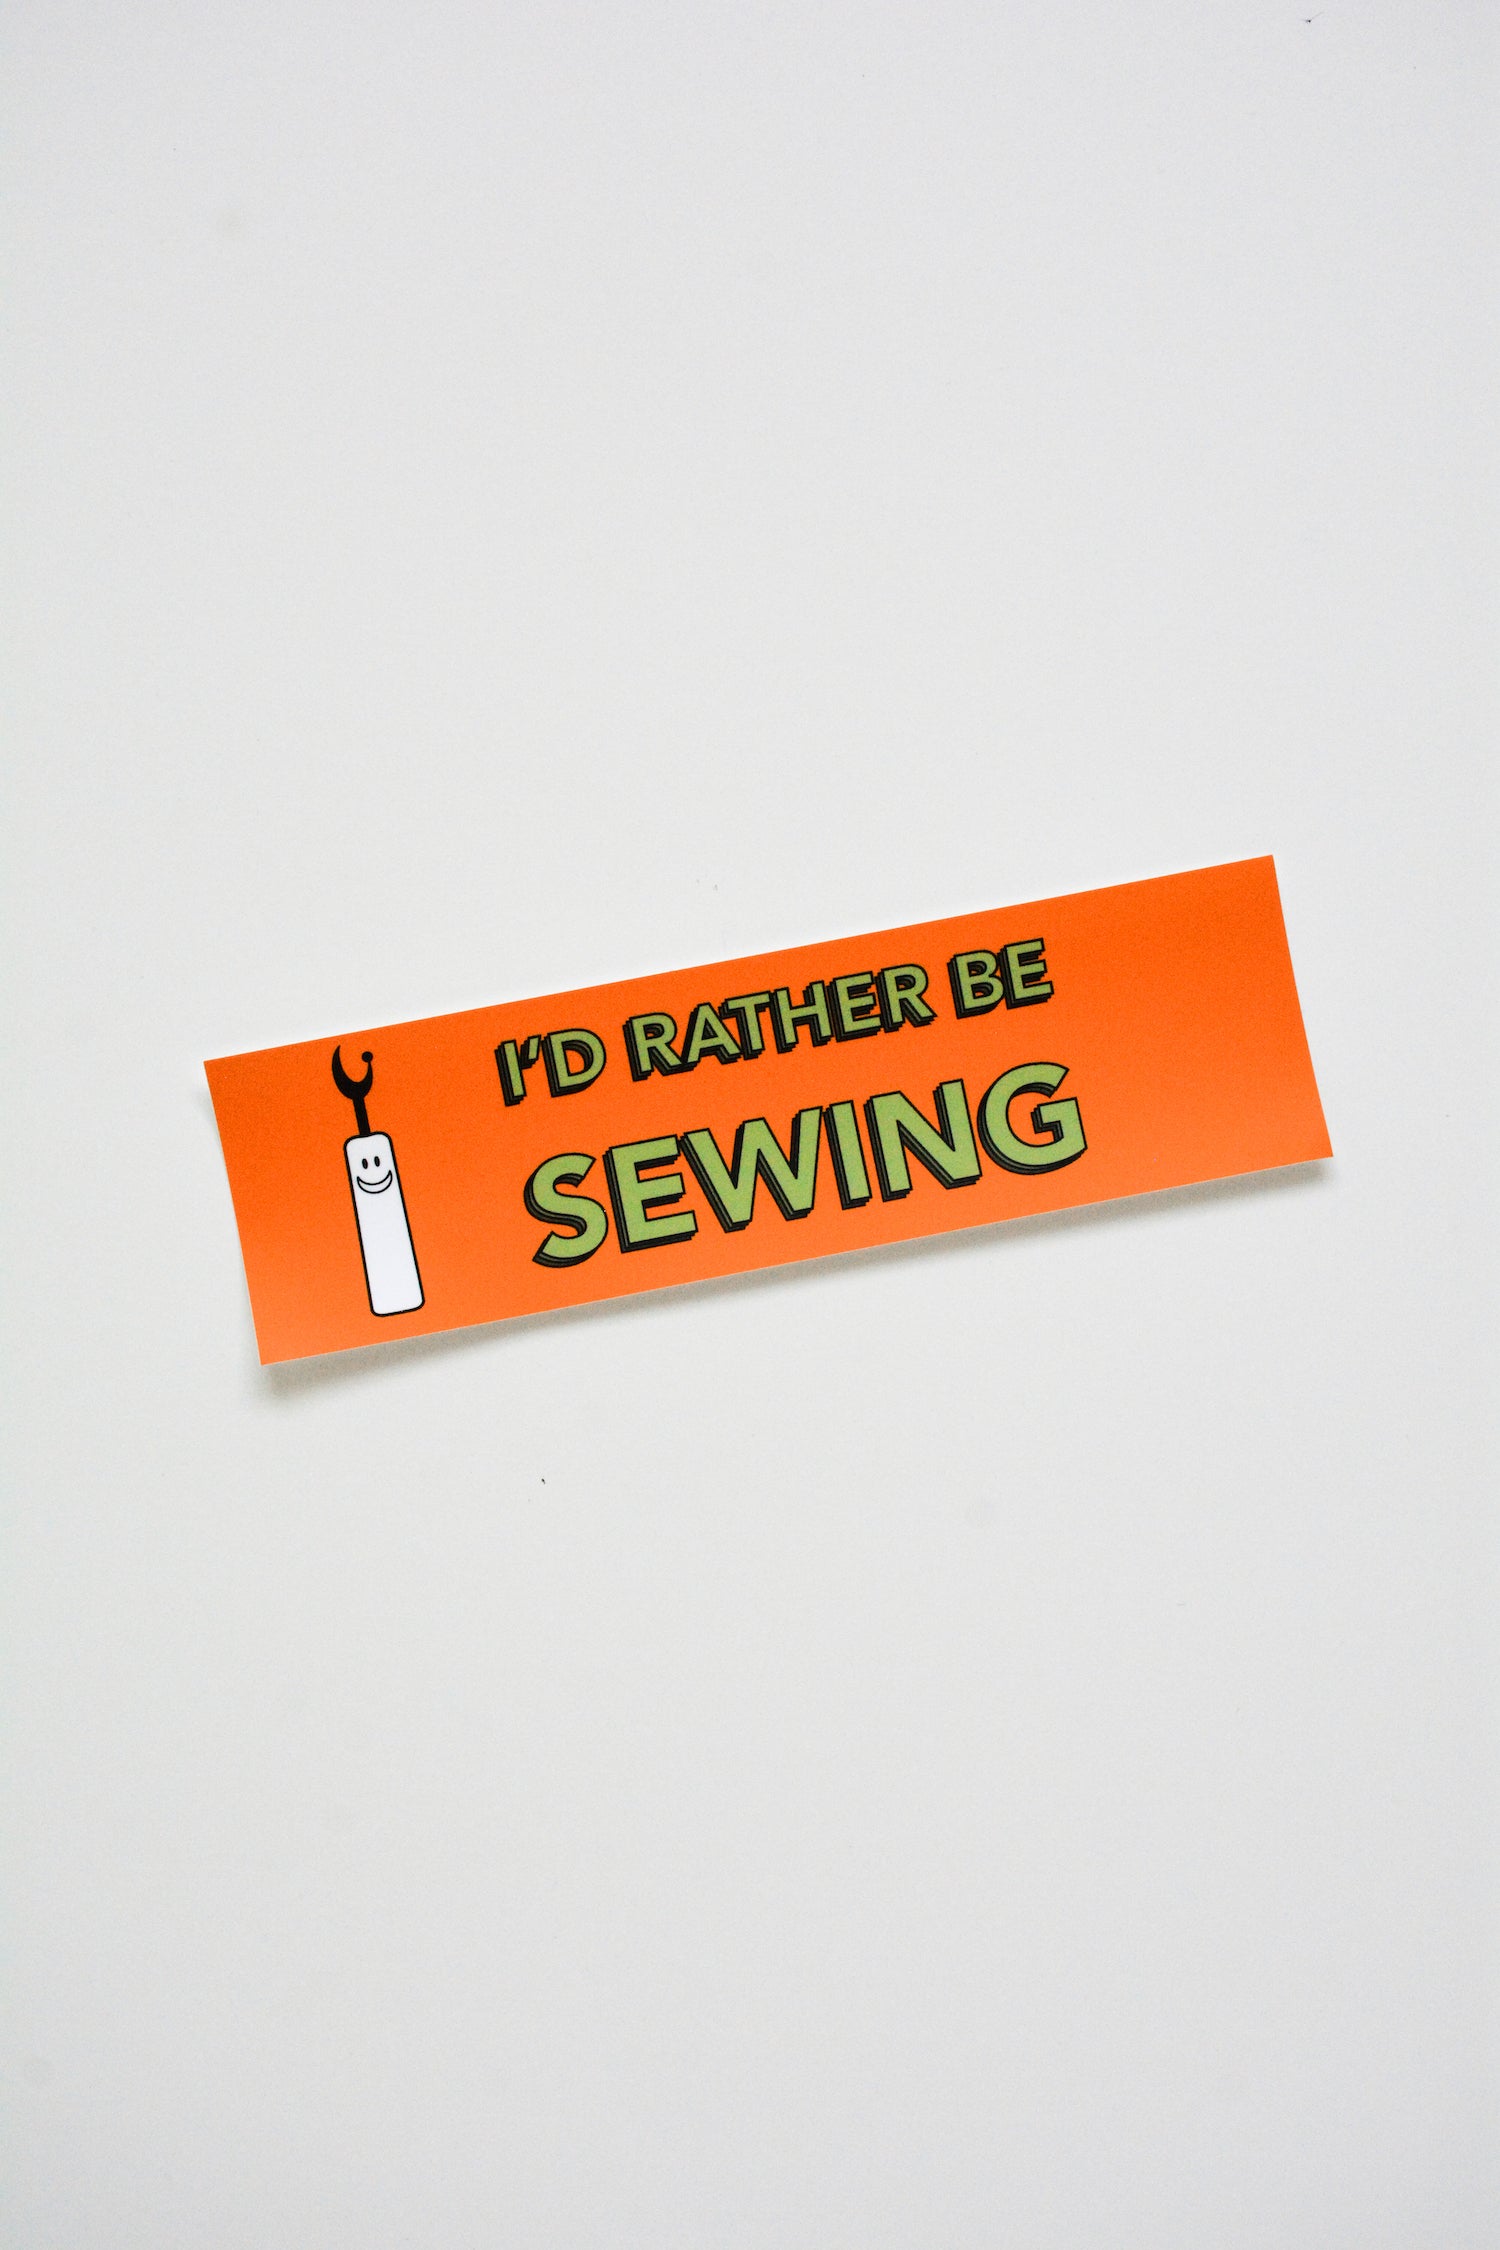 I'd Rather Be Sewing Bumper Sticker